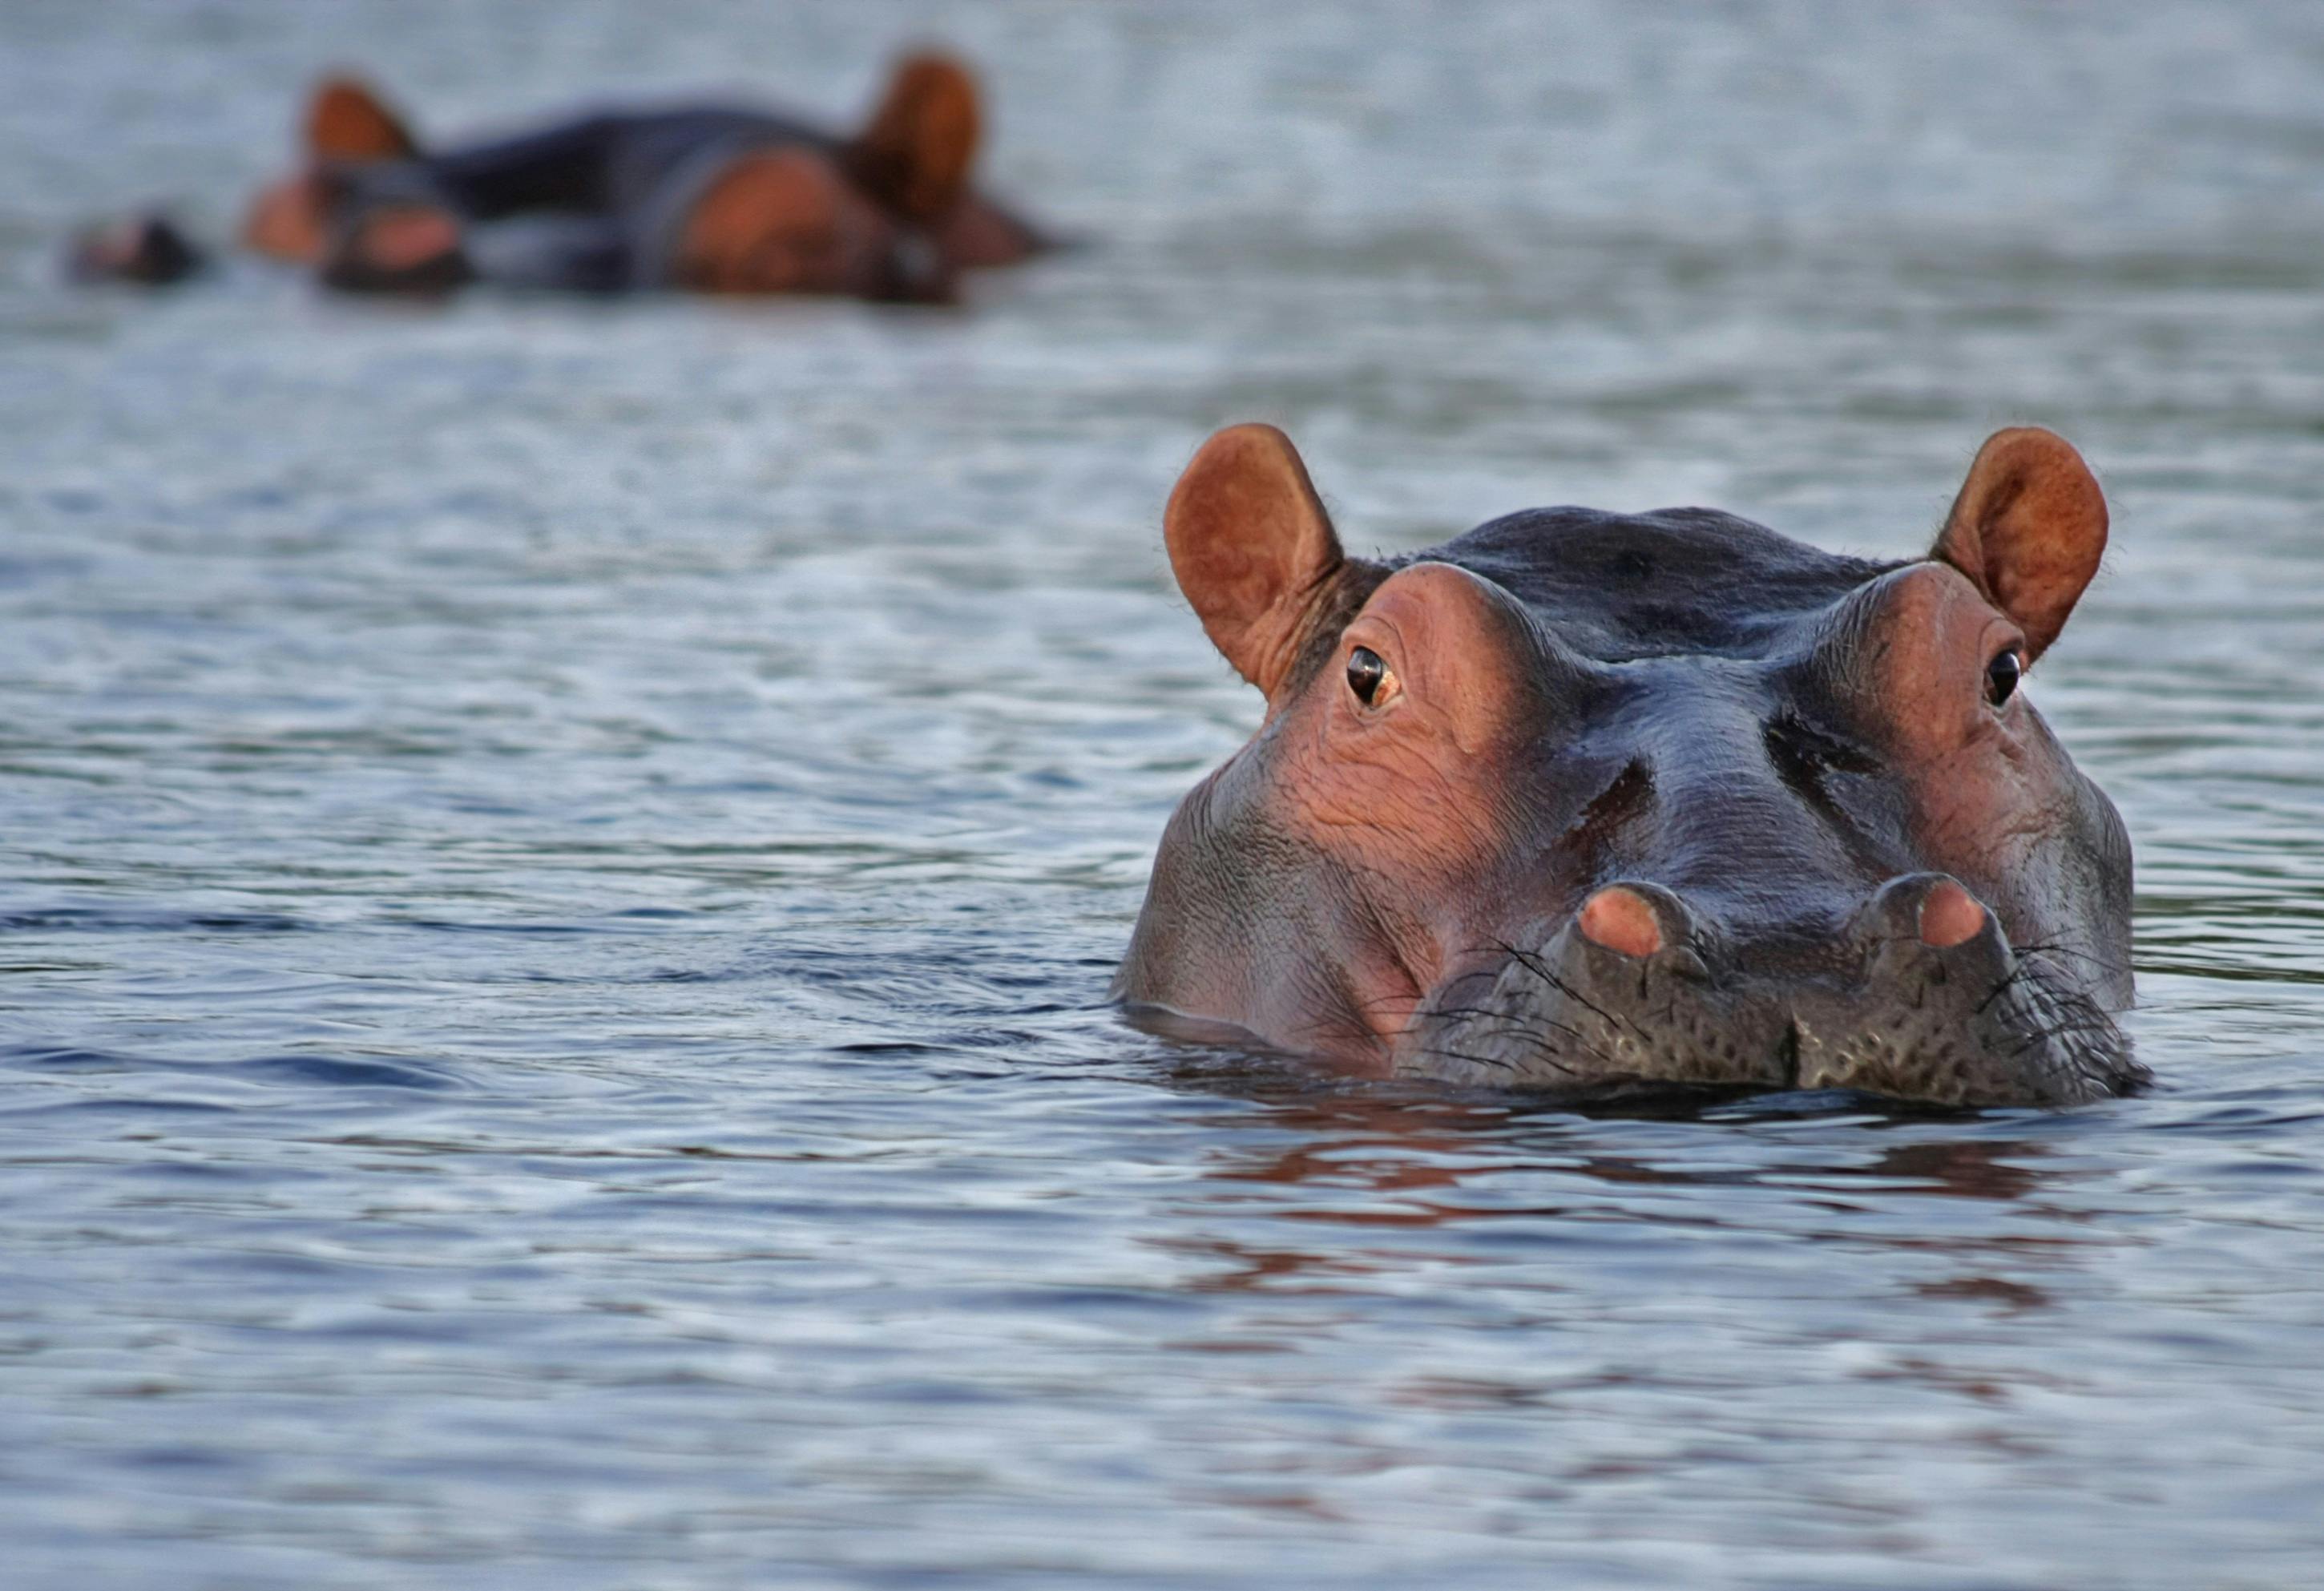 Wallpaper : hippos, Ethiopia, resting head, river, forest, ripples, nature  1920x1080 - vfgx - 1750079 - HD Wallpapers - WallHere